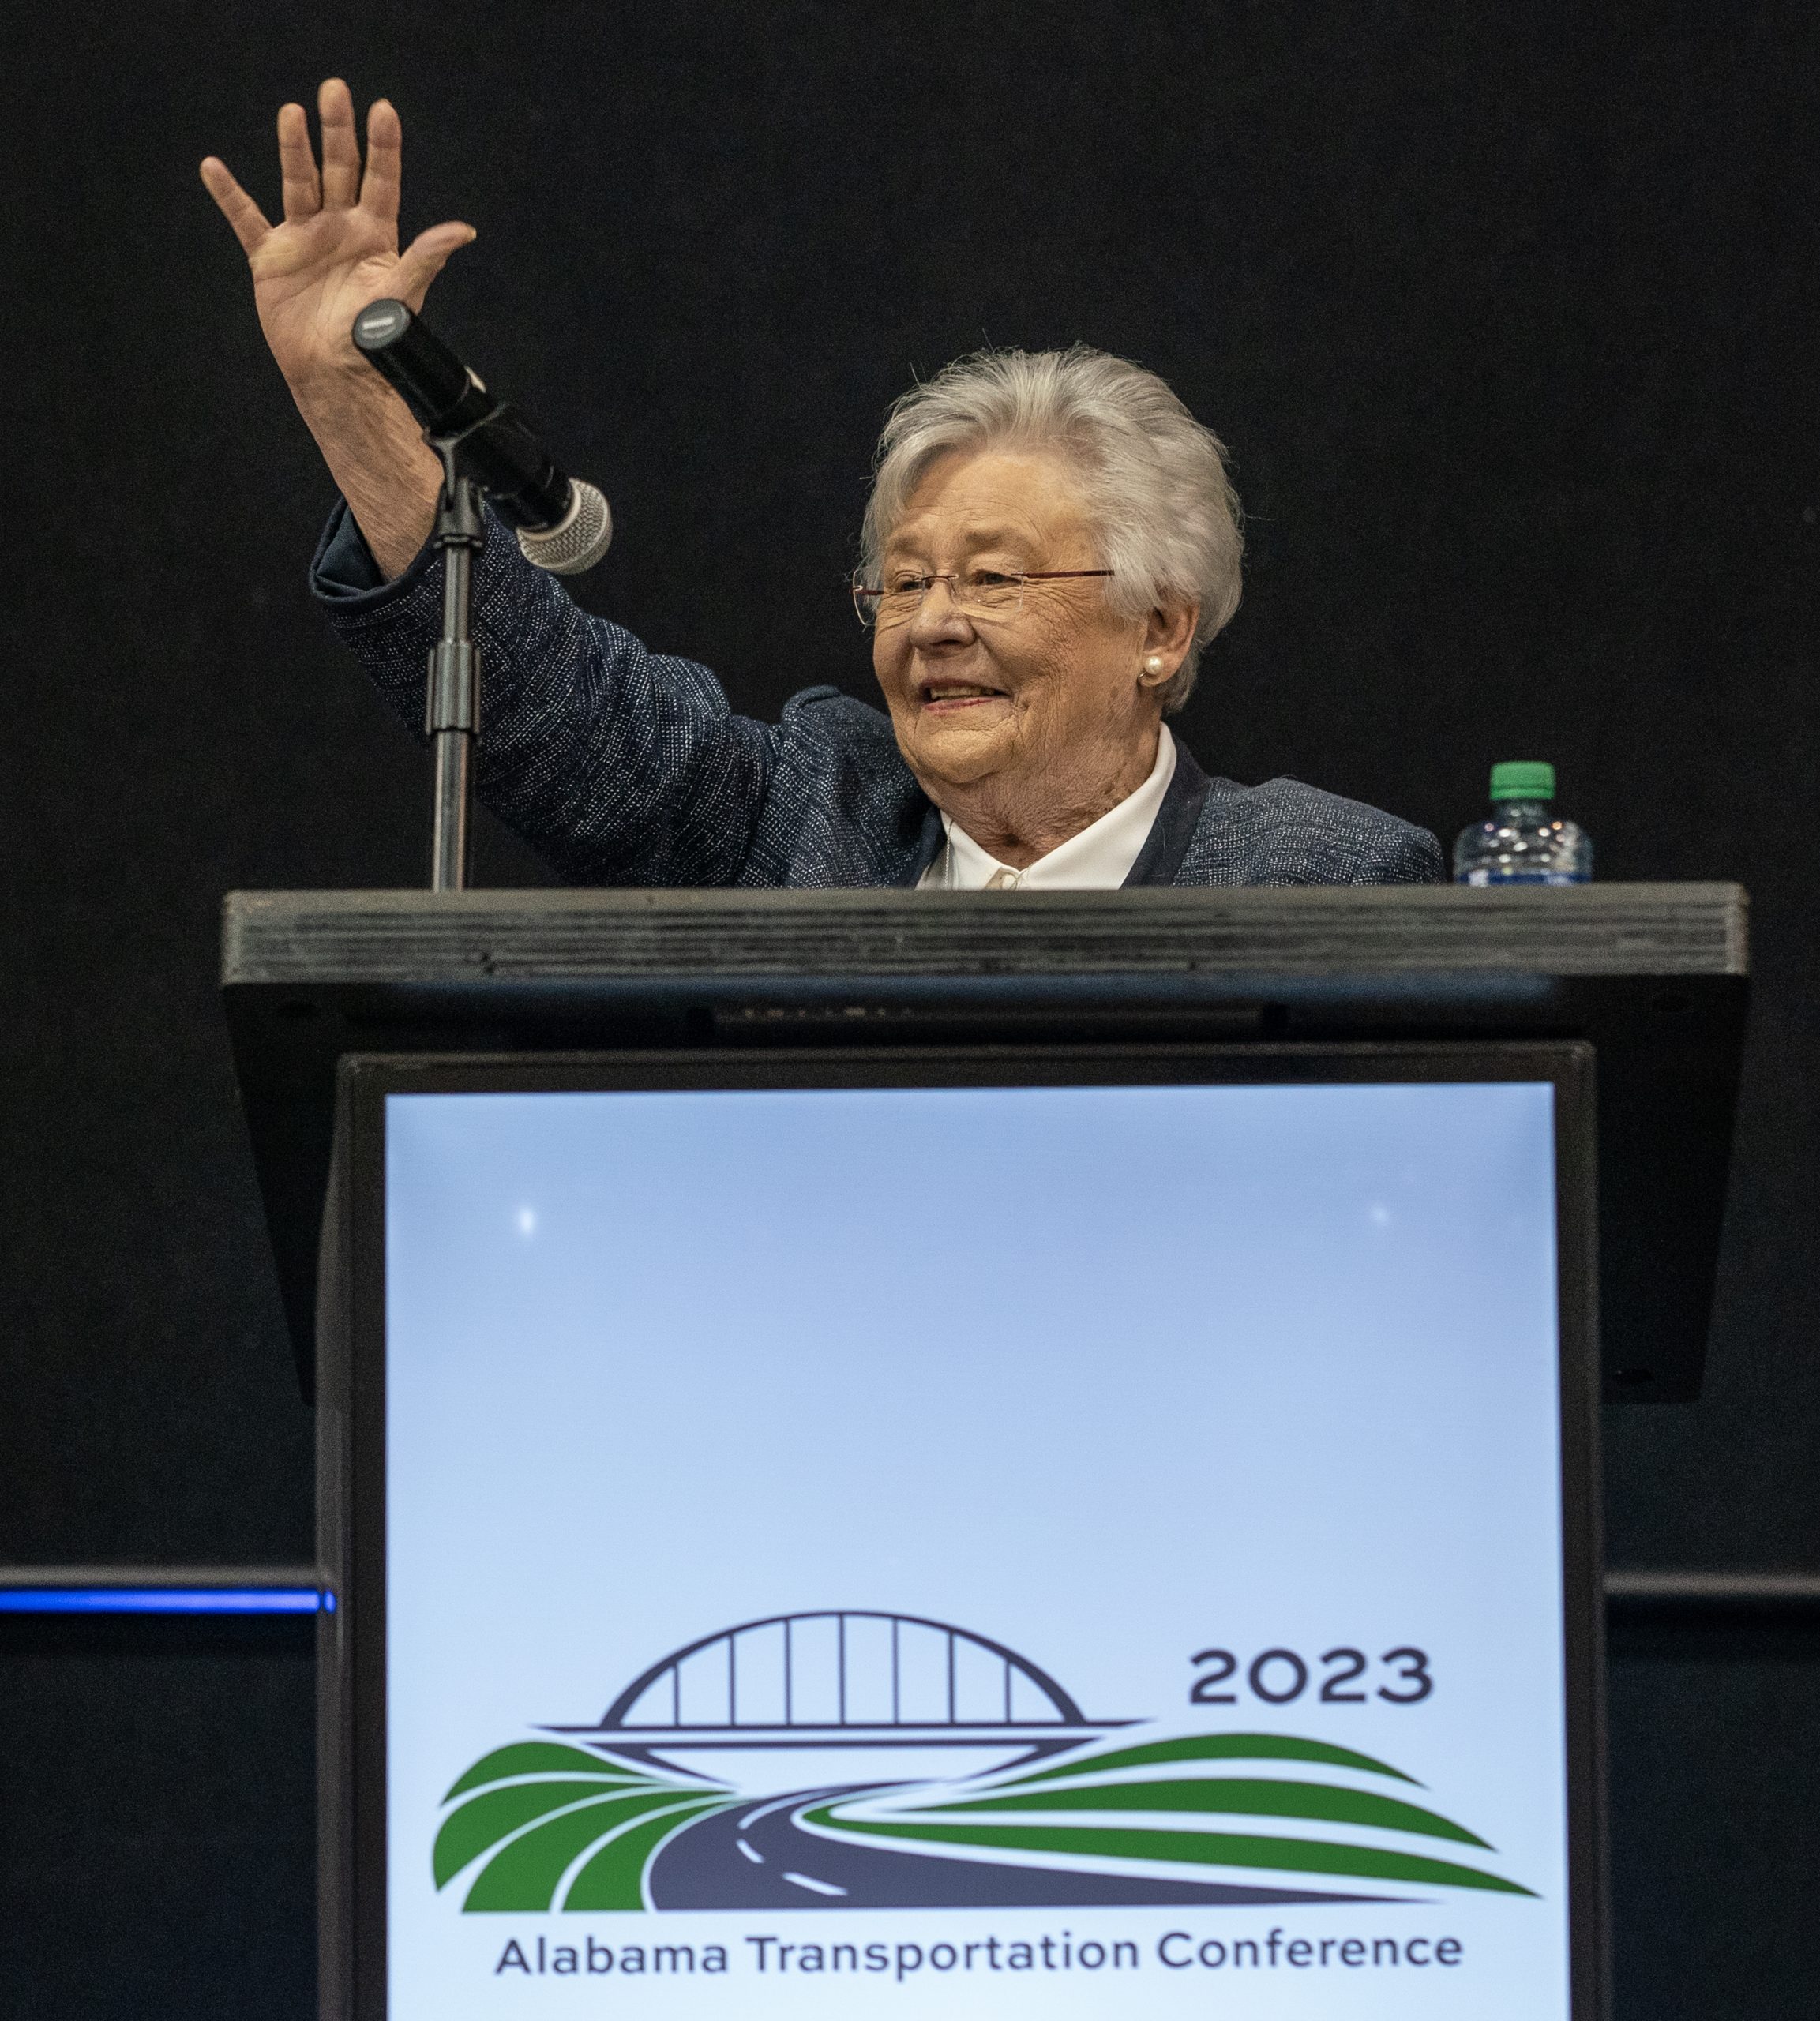 Governor Kay Ivey standing in front of a podium waving at the crowd